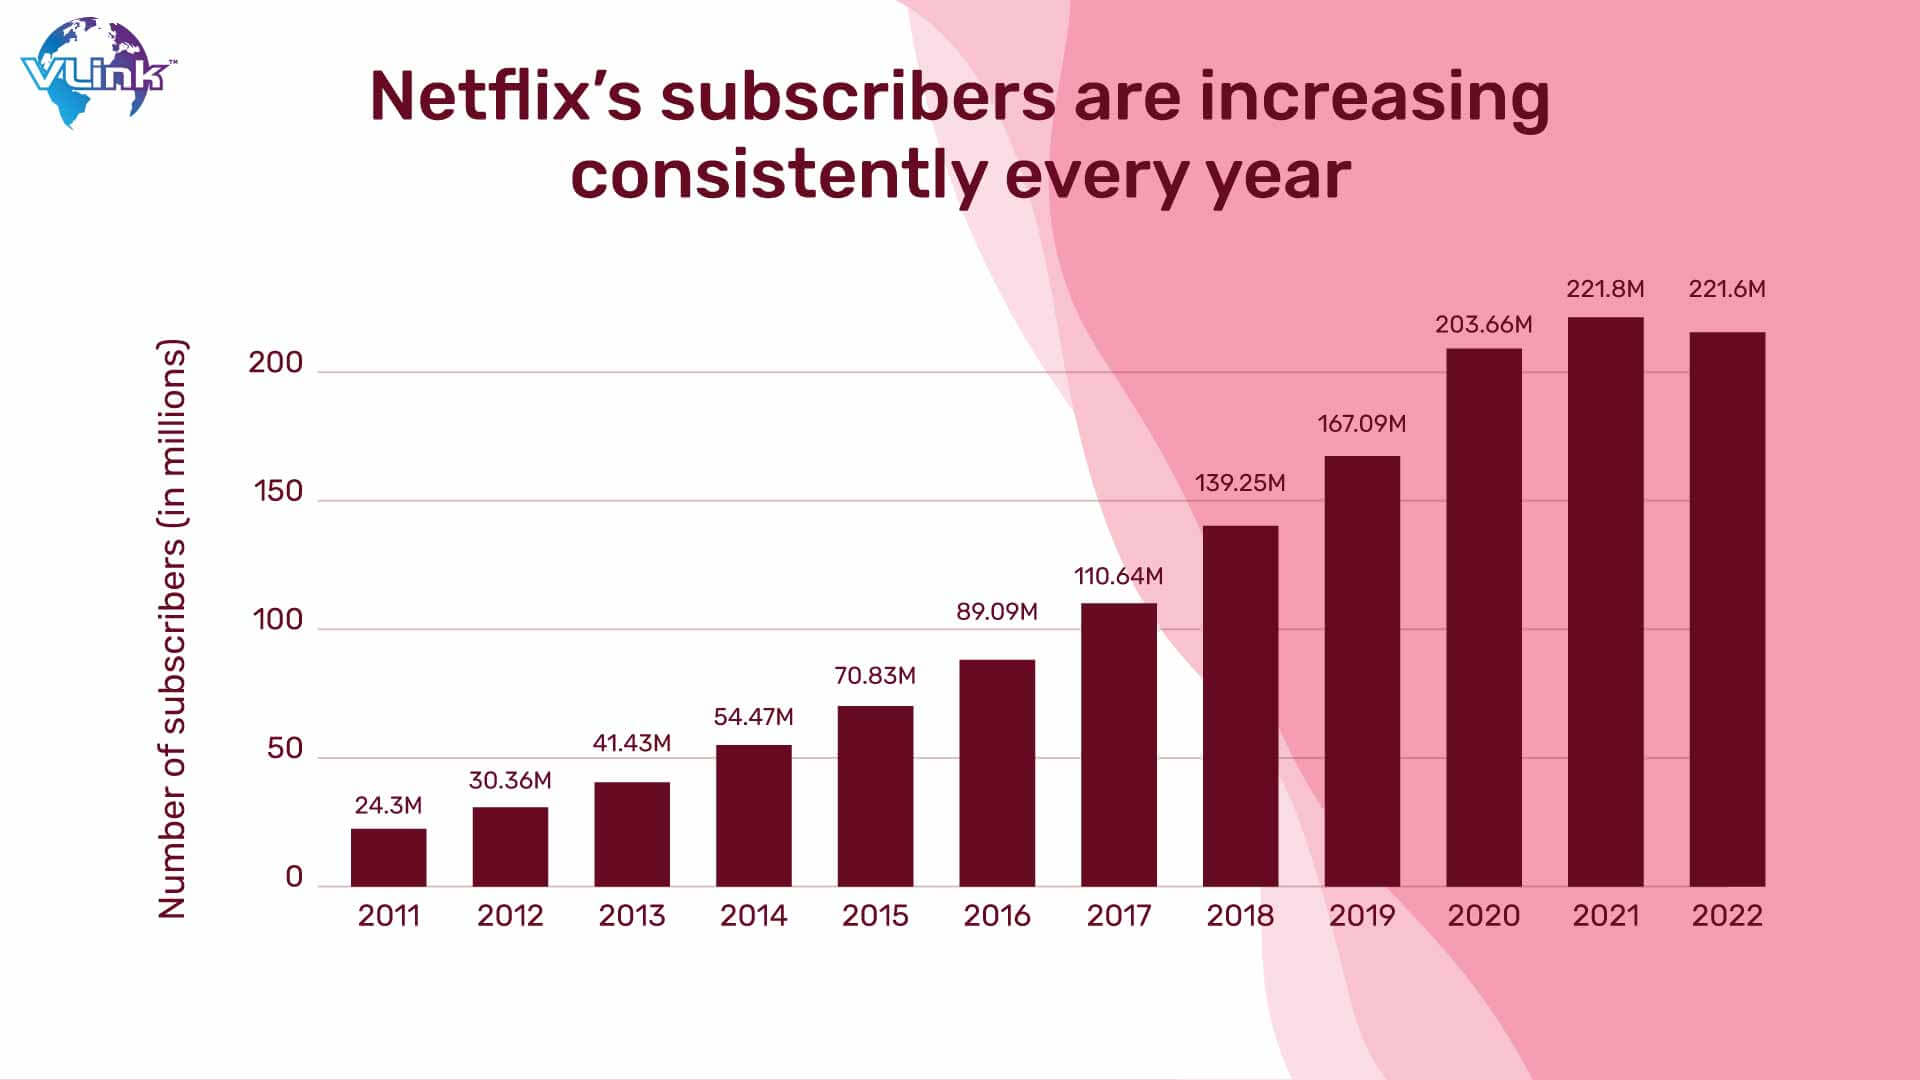 Netflix’s subscribers are increasing consistently every year